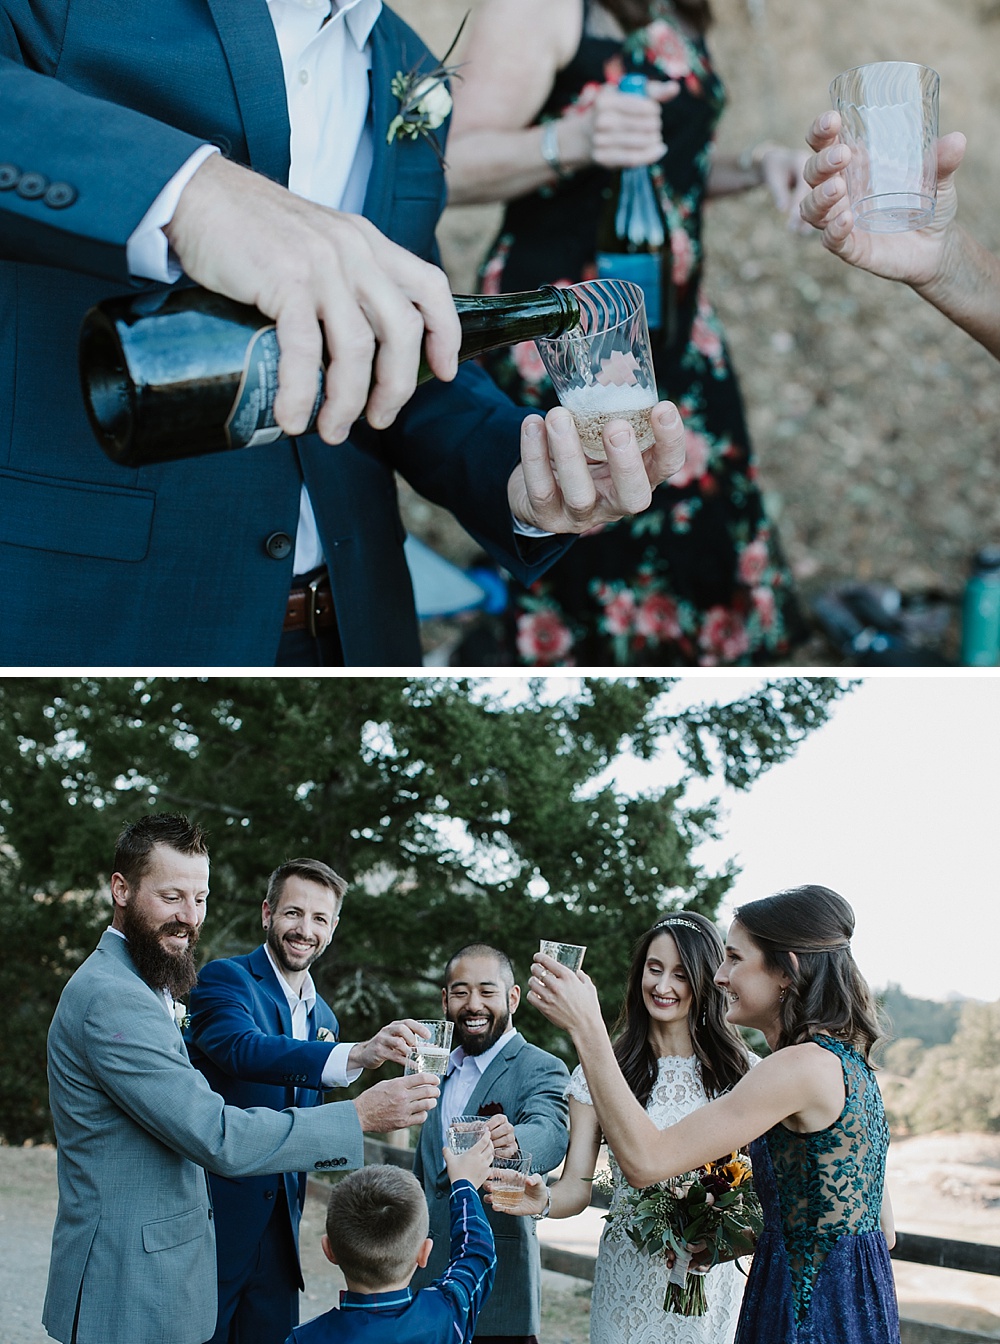 Champagne is served at Marin County wedding